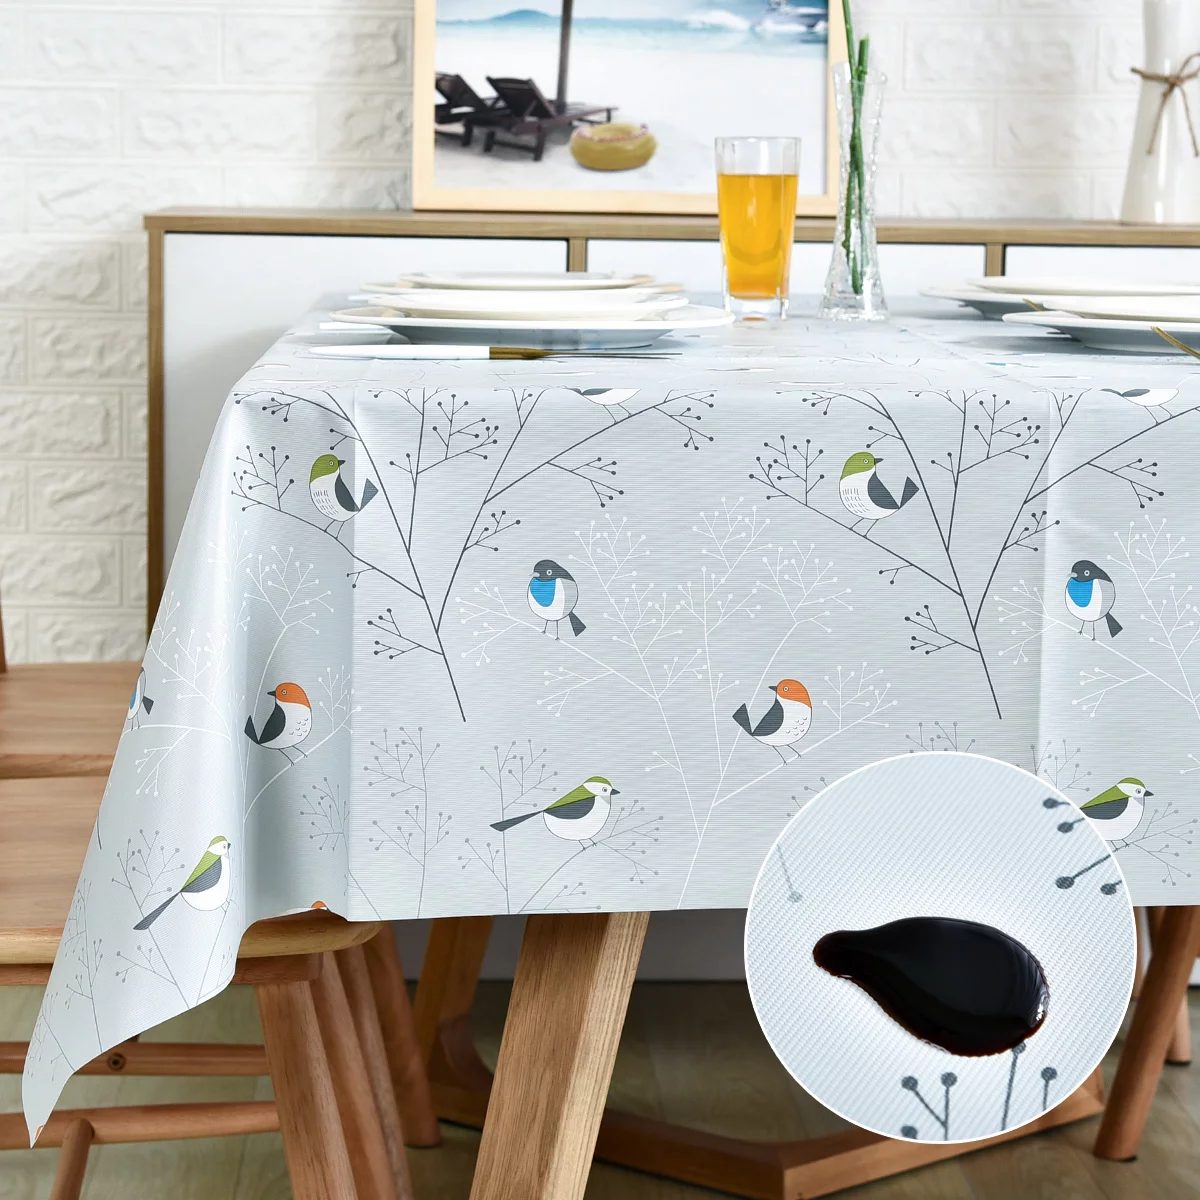 Why you should choose oilcloth tablecloth instead of PVC tablecloth